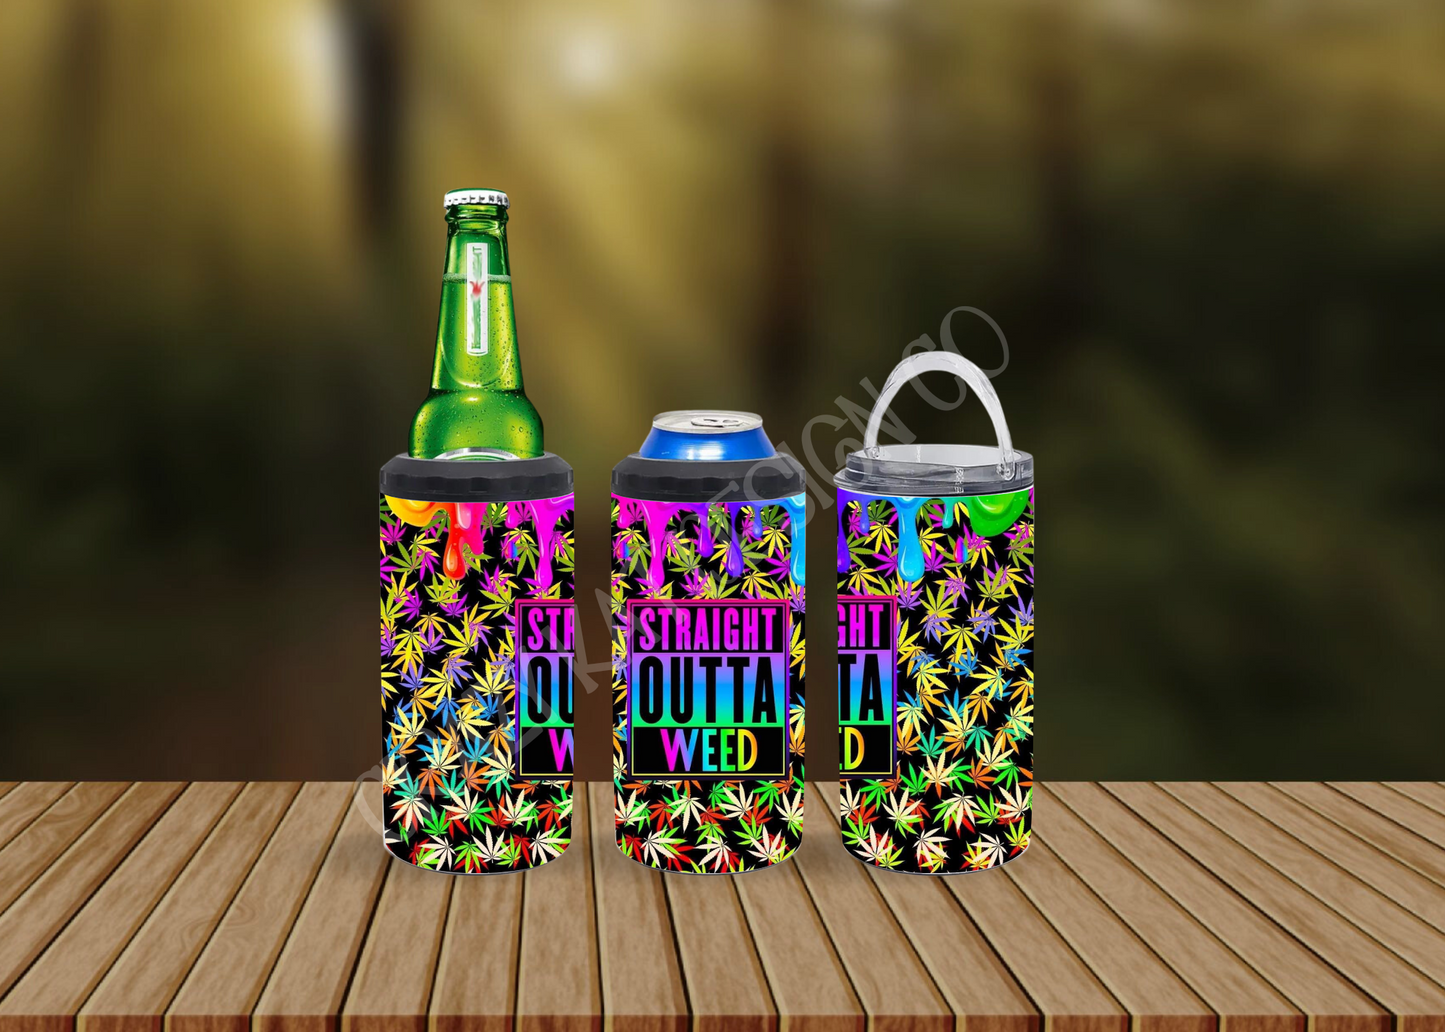 CUSTOMIZABLE STRAIGHT OUTTA WEED HOT AND COLD TUMBLERS